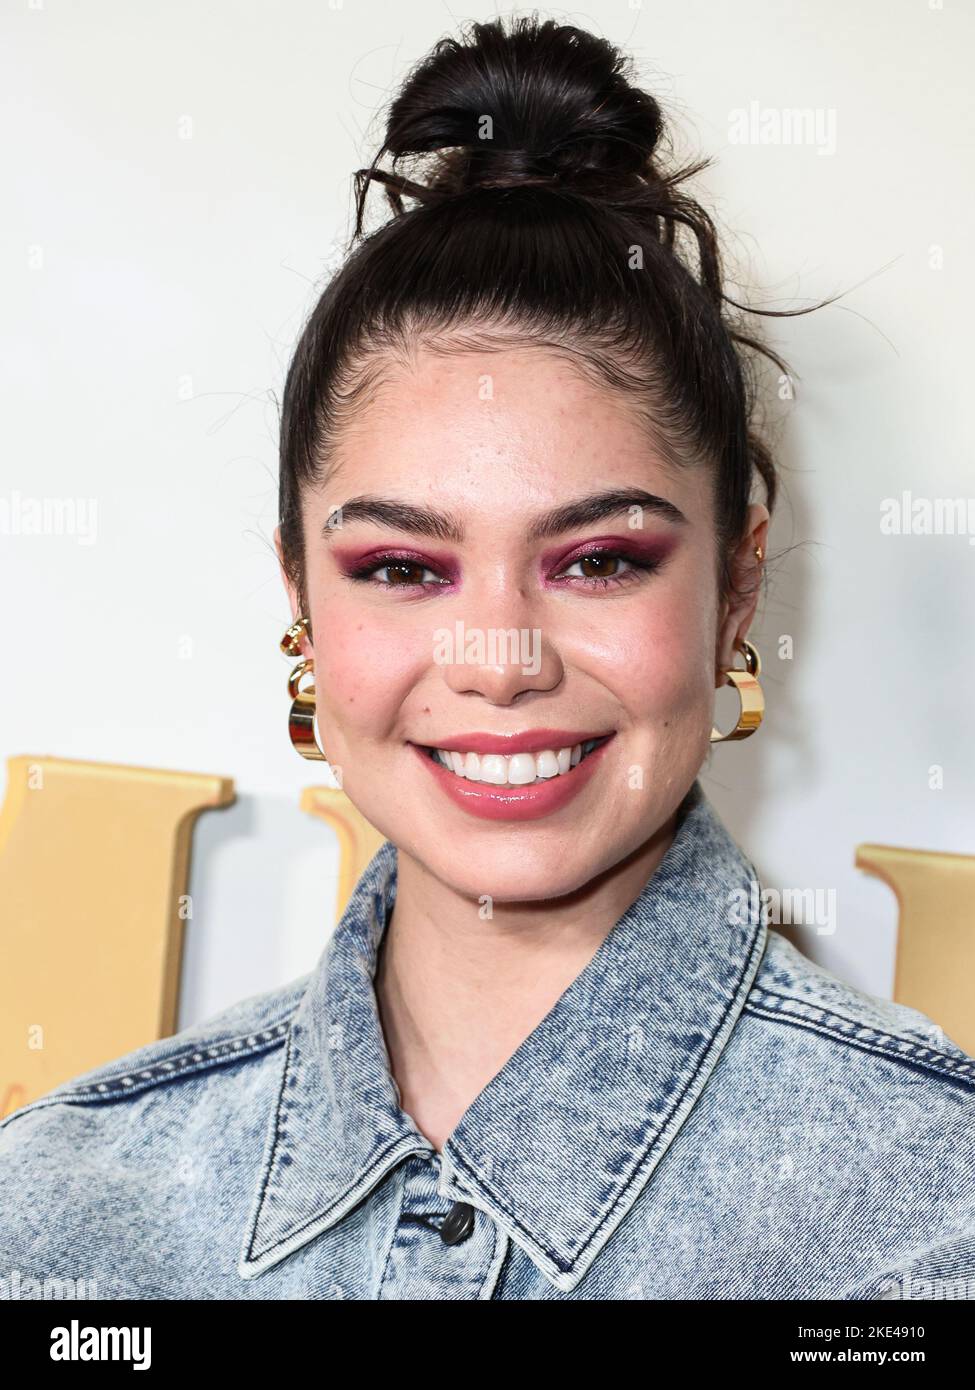 CENTURY CITY, LOS ANGELES, CALIFORNIA, USA - NOVEMBER 09: American actress and singer Auli'i Cravalho arrives at the Los Angeles Premiere Of Netflix's 'Slumberland' held at AMC Century City 15 at Westfield Century City on November 9, 2022 in Century City, Los Angeles, California, United States. (Photo by Xavier Collin/Image Press Agency) Stock Photo